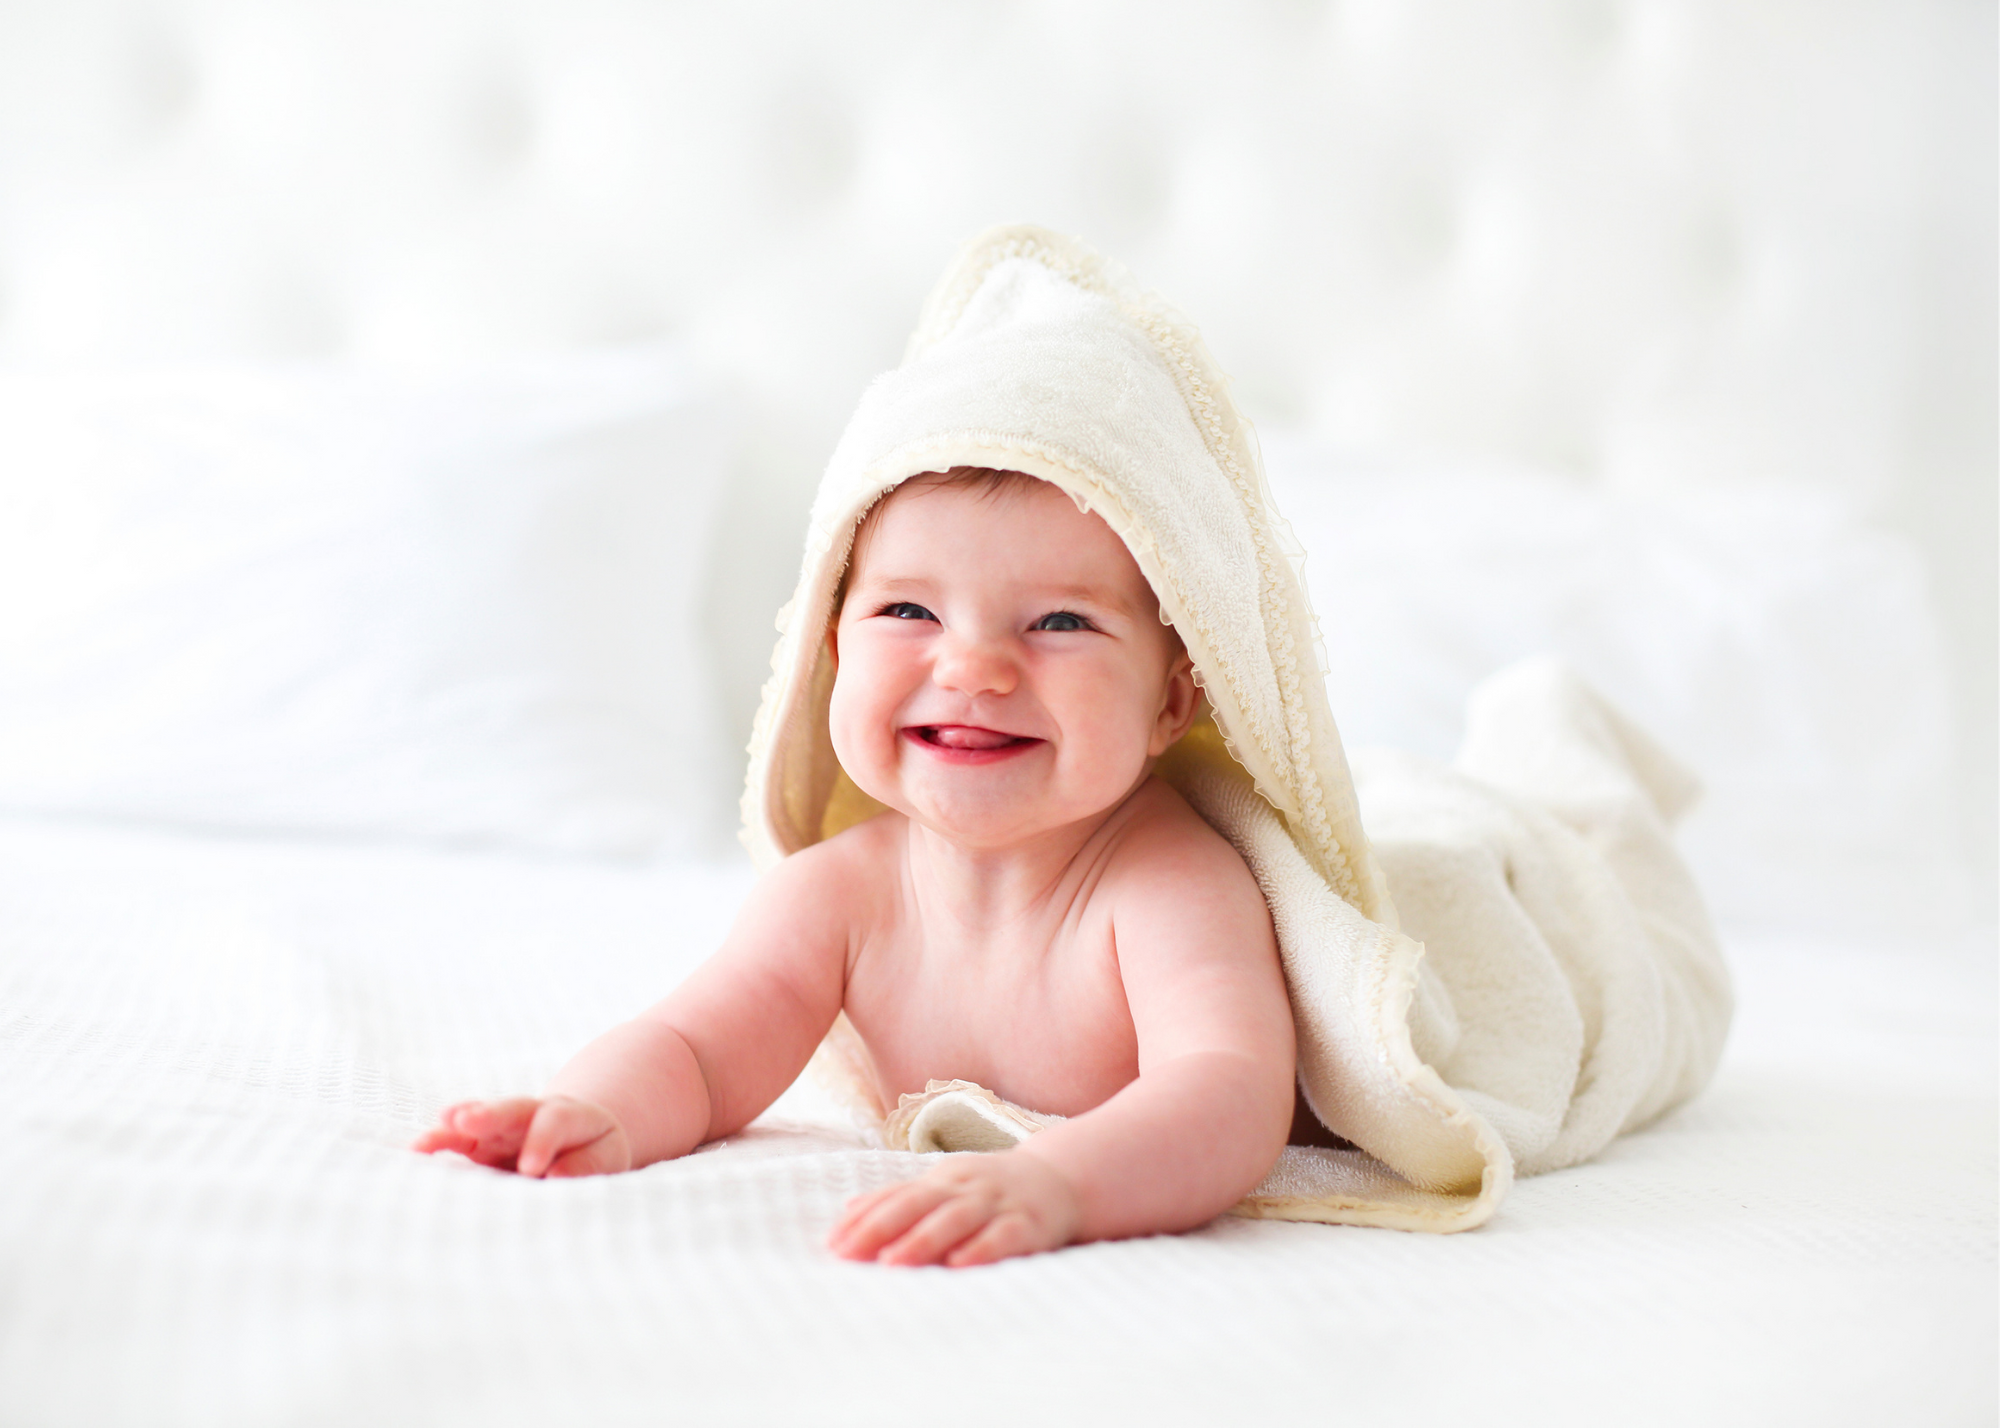 Baby smiles while wearing hooded towel on bed.